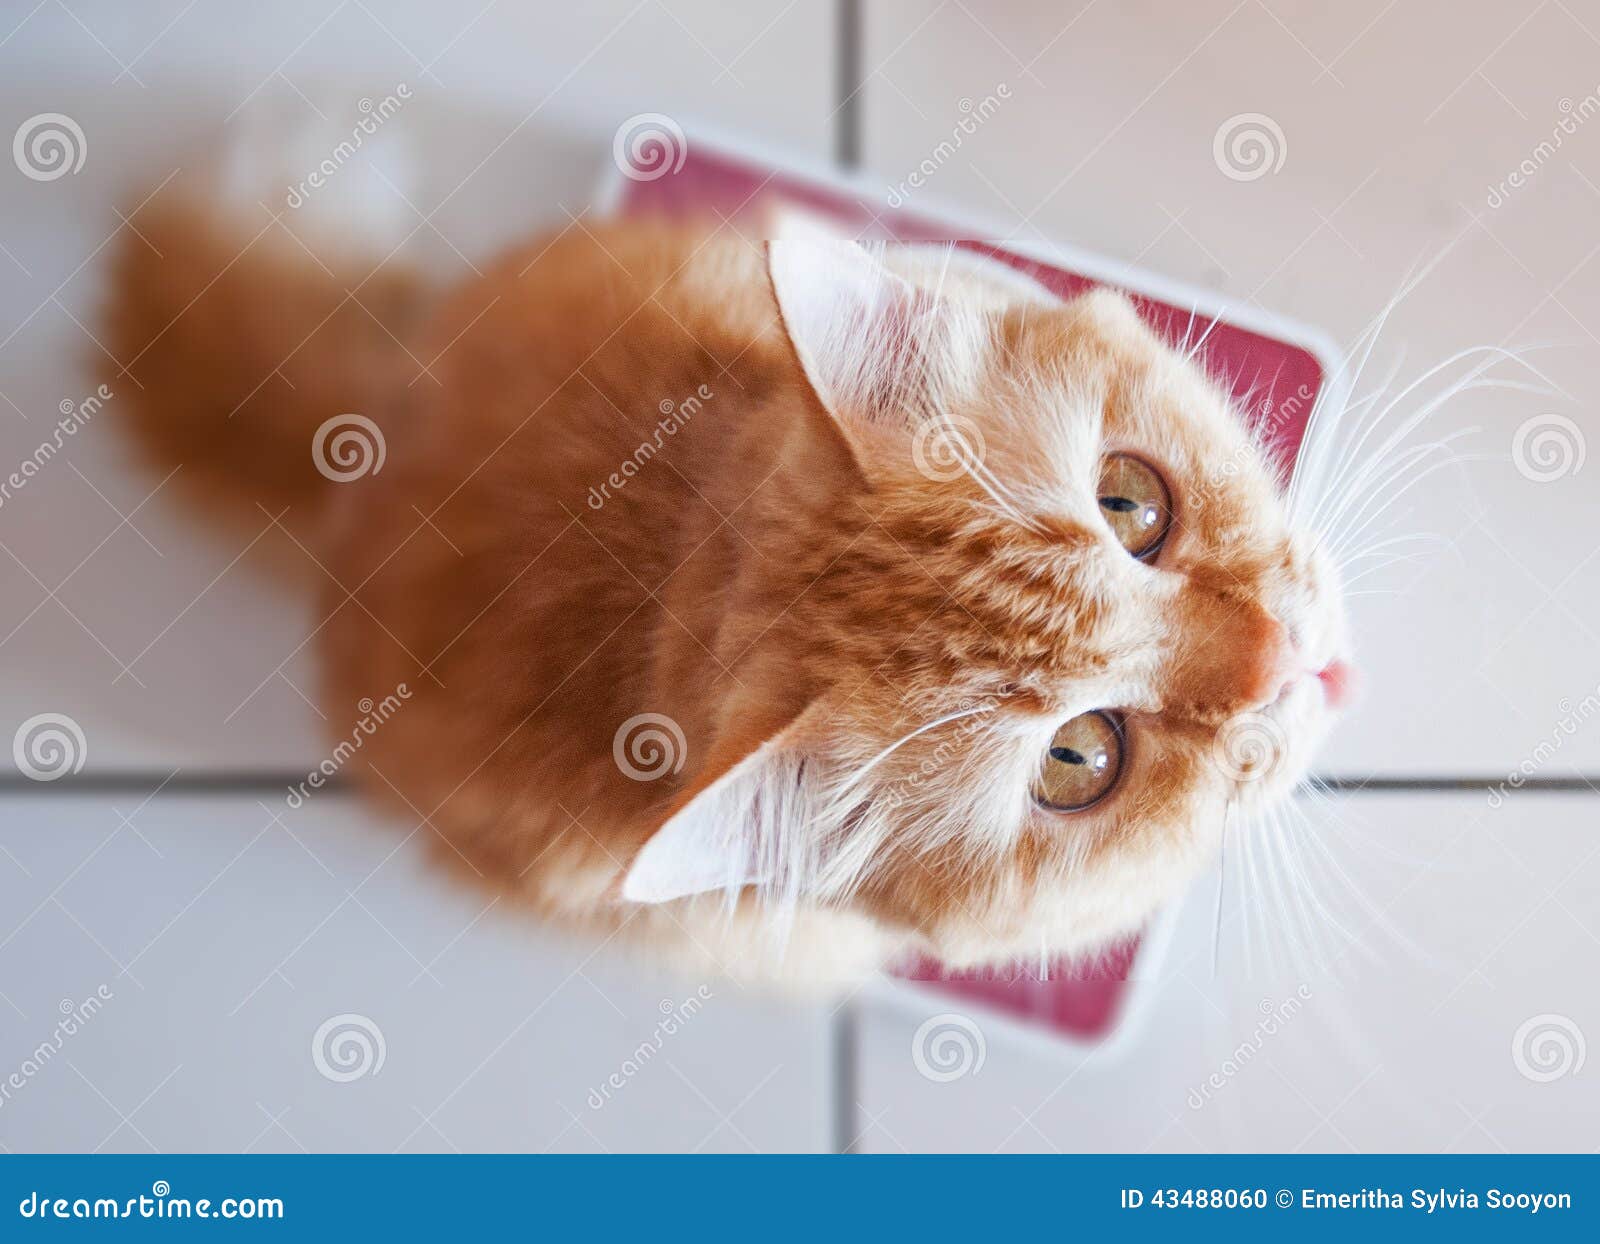 https://thumbs.dreamstime.com/z/yellow-cat-weighing-scale-looking-up-annoyed-expression-43488060.jpg